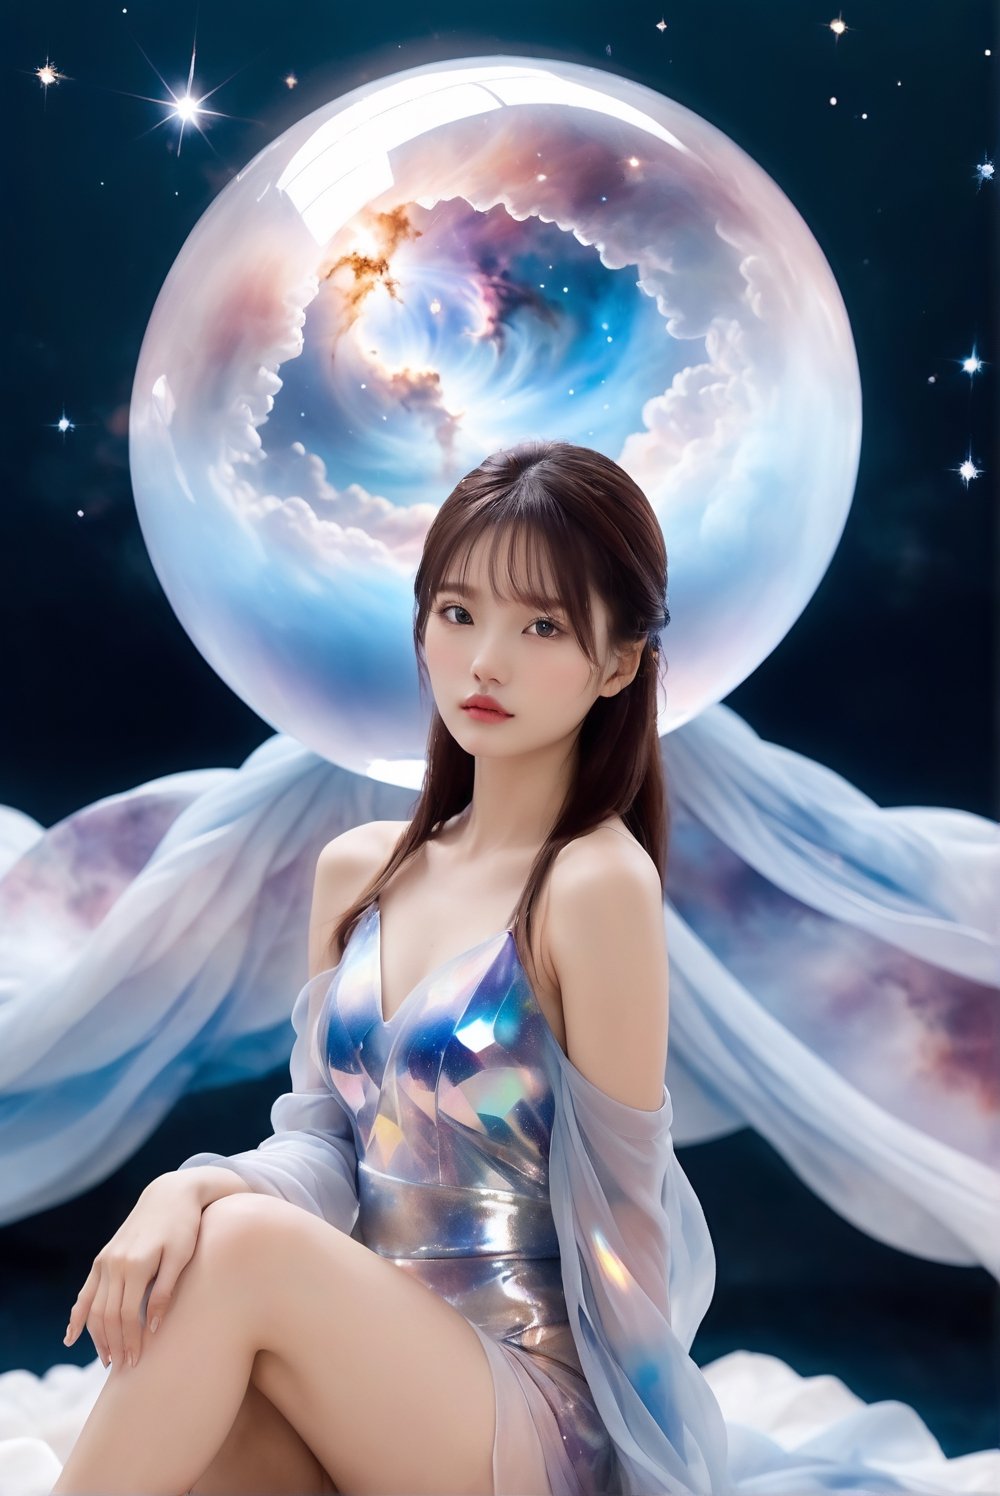 award-winning photography, ichika, Carina Nebula in a crystal ball in front of her chest, galaxy in the background, hyperrealistic, the picture highlight the surreal beauty of ichika, 